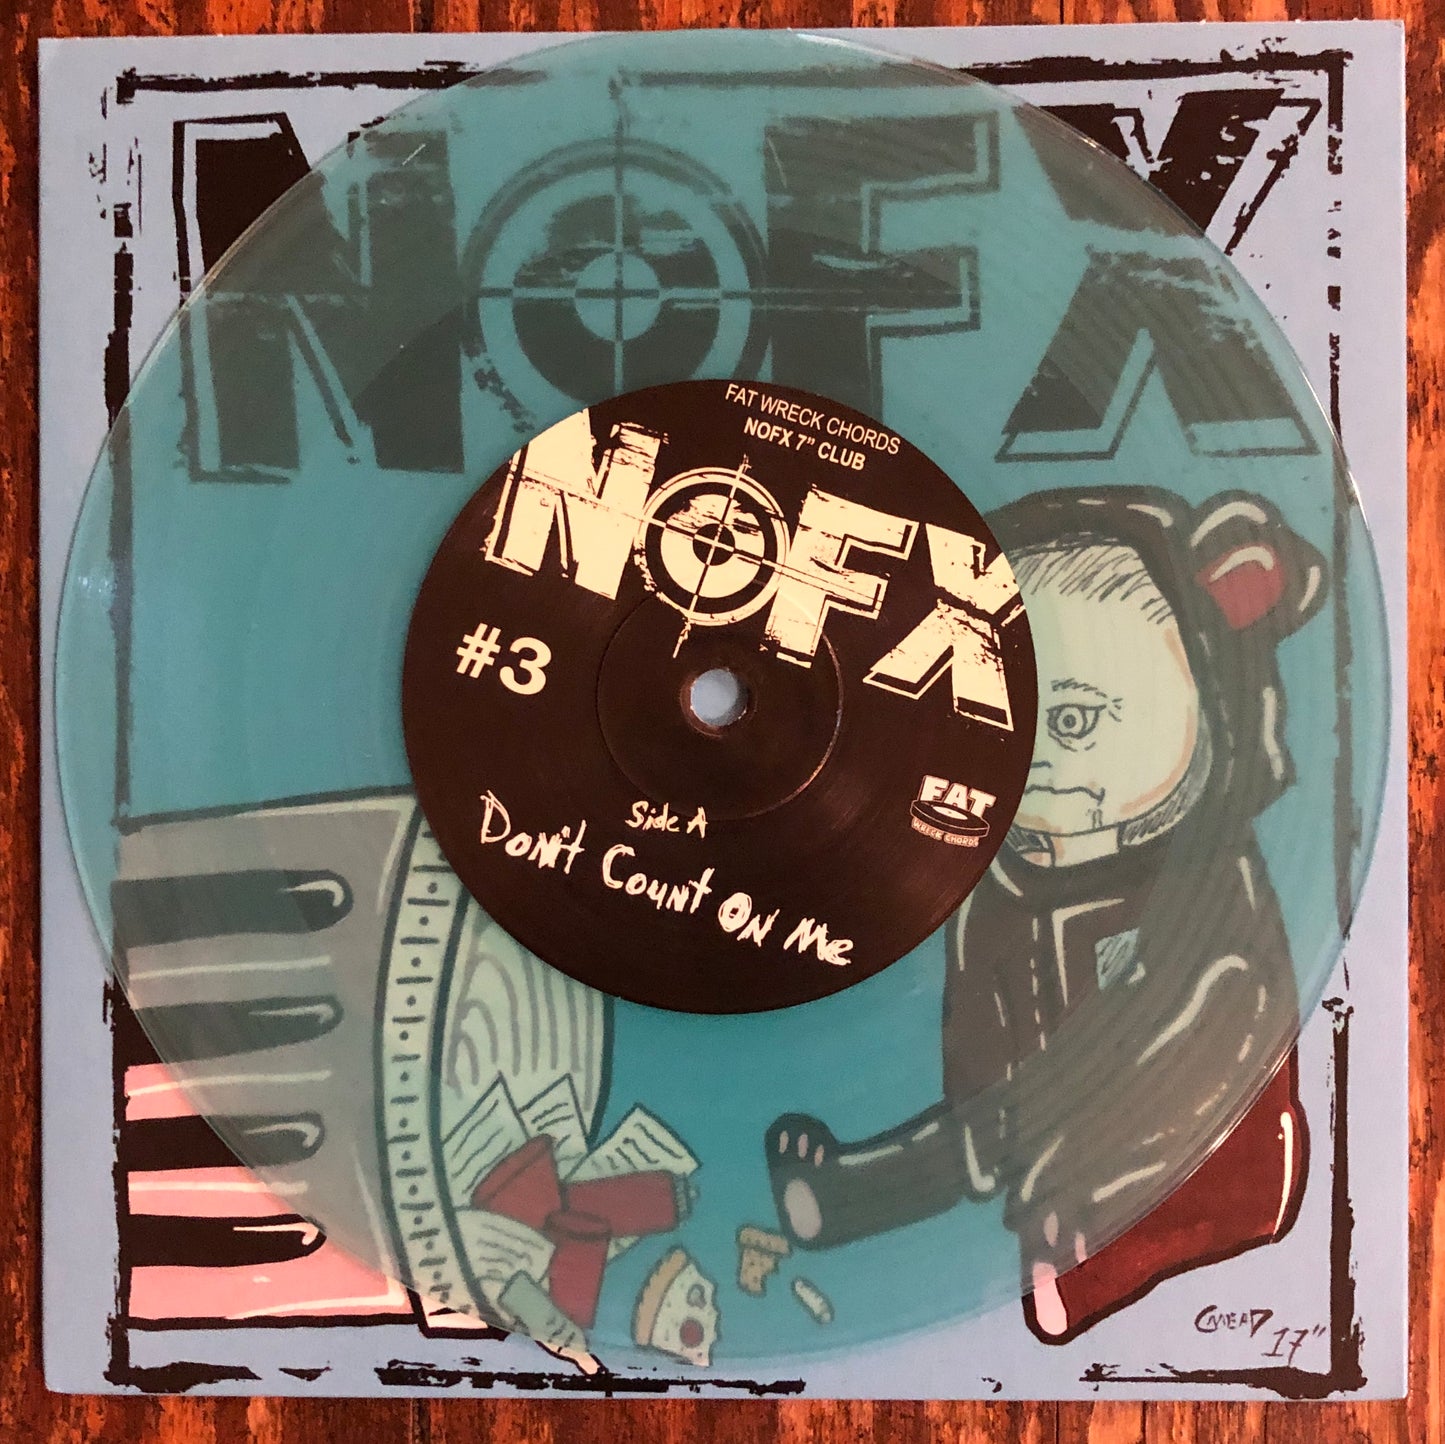 NOFX "Don't Count on Me"